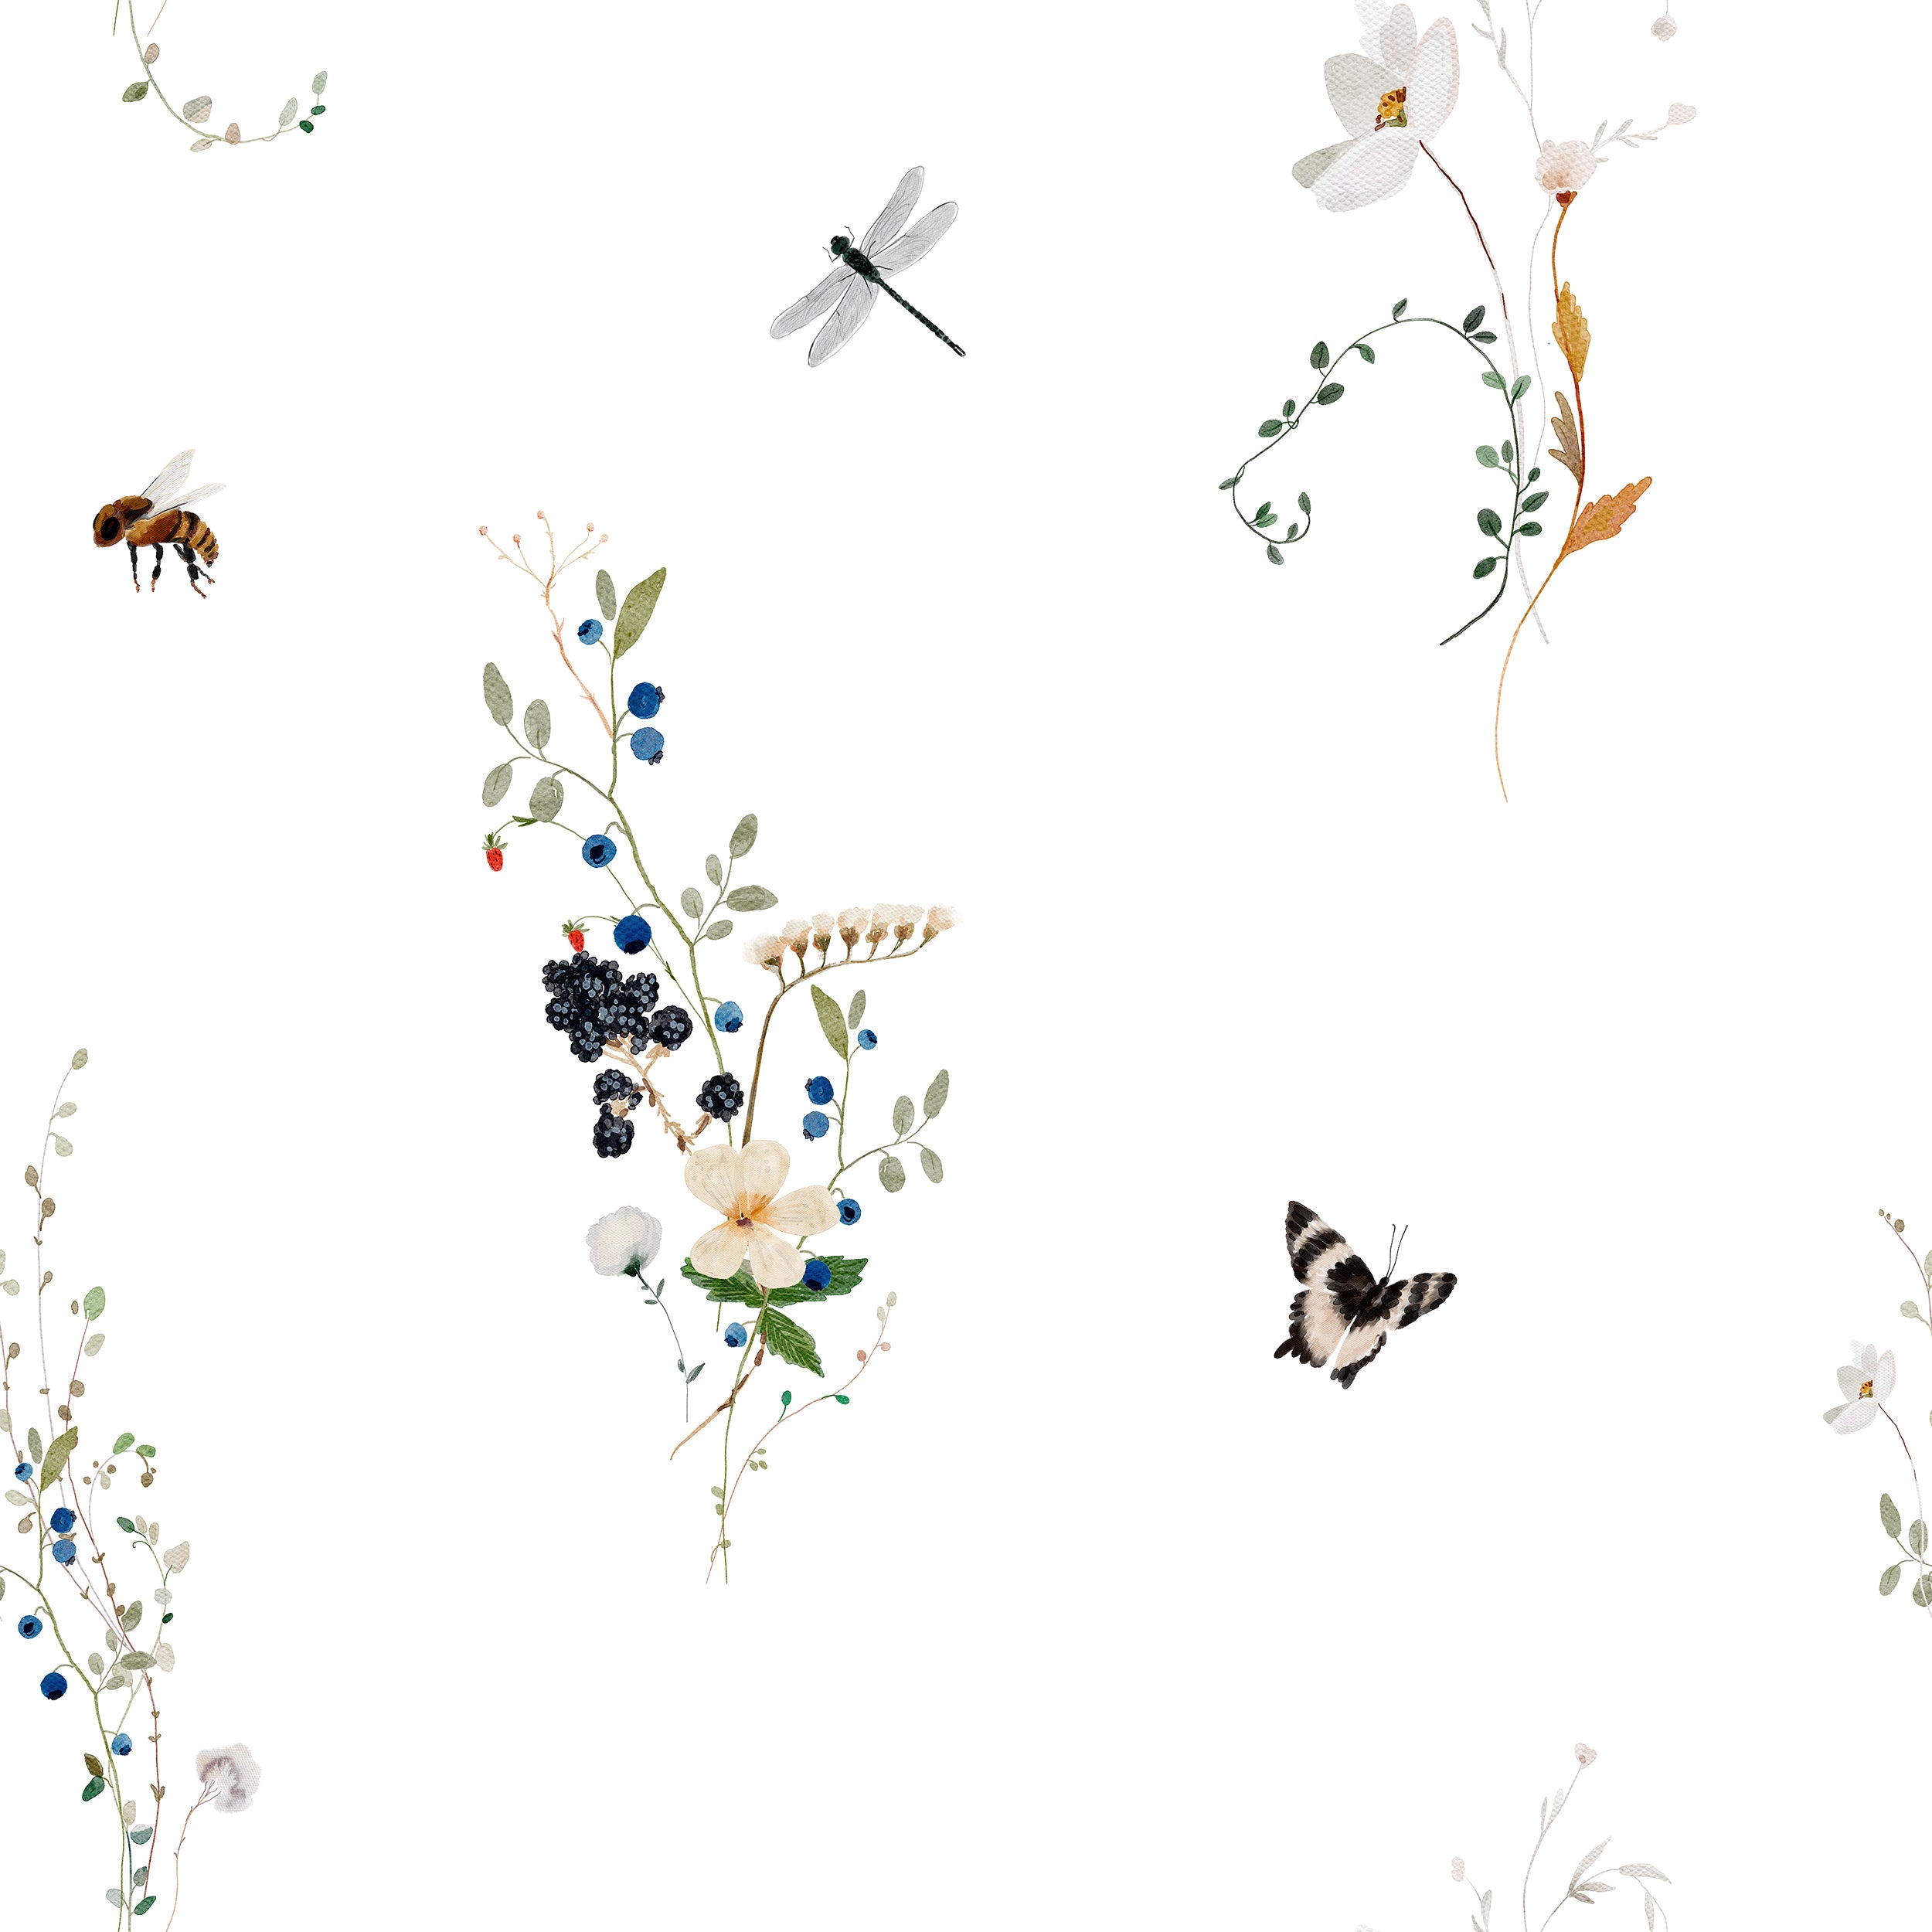 A close-up view of the "Berry Spring Wallpaper," highlighting its intricate details. The design features delicate botanical illustrations with small flowers, berries, and various insects such as butterflies and bees, set against a clean white background.